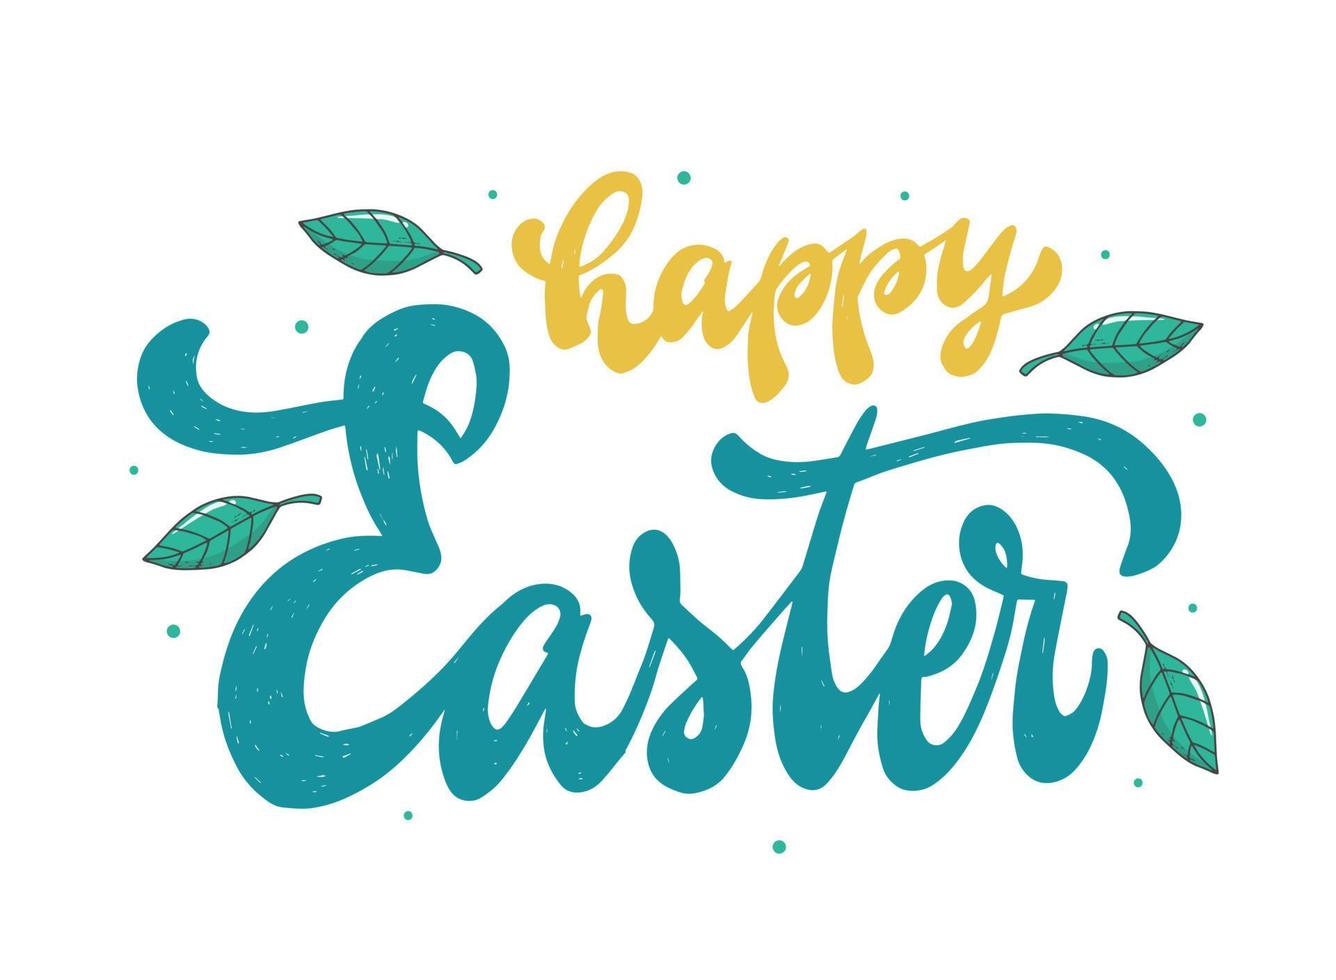 Happy Easter lettering quote decorated with leaves. Good for greeting cards, posters, invitations, prints, banners, stickers, etc. EPS 10 vector